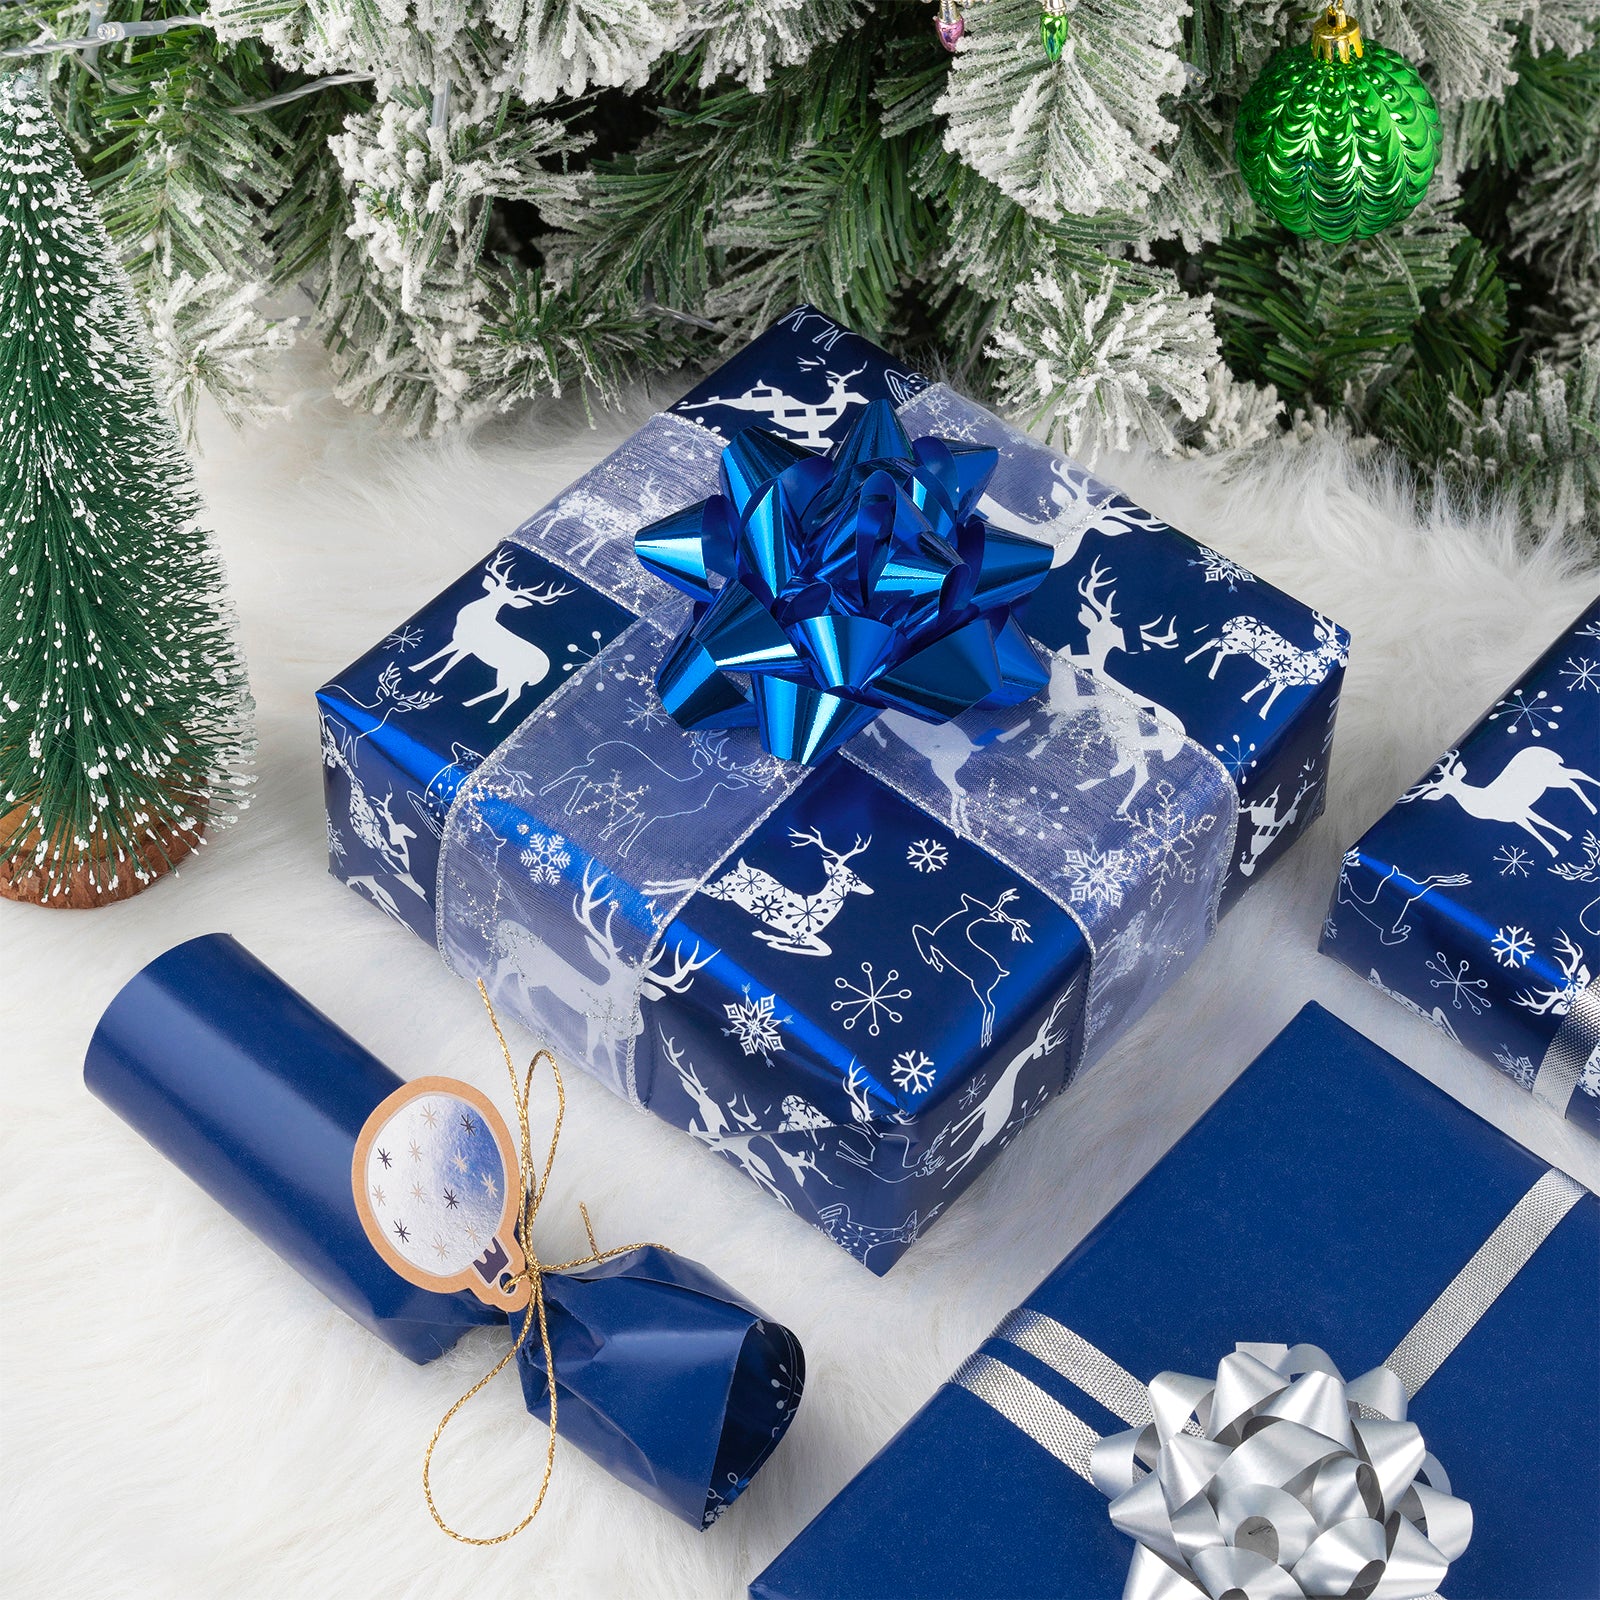 Navy Deer Wrapping Paper Roll with Solid Navy Blue on Reverse. Wholesale Wrapholic